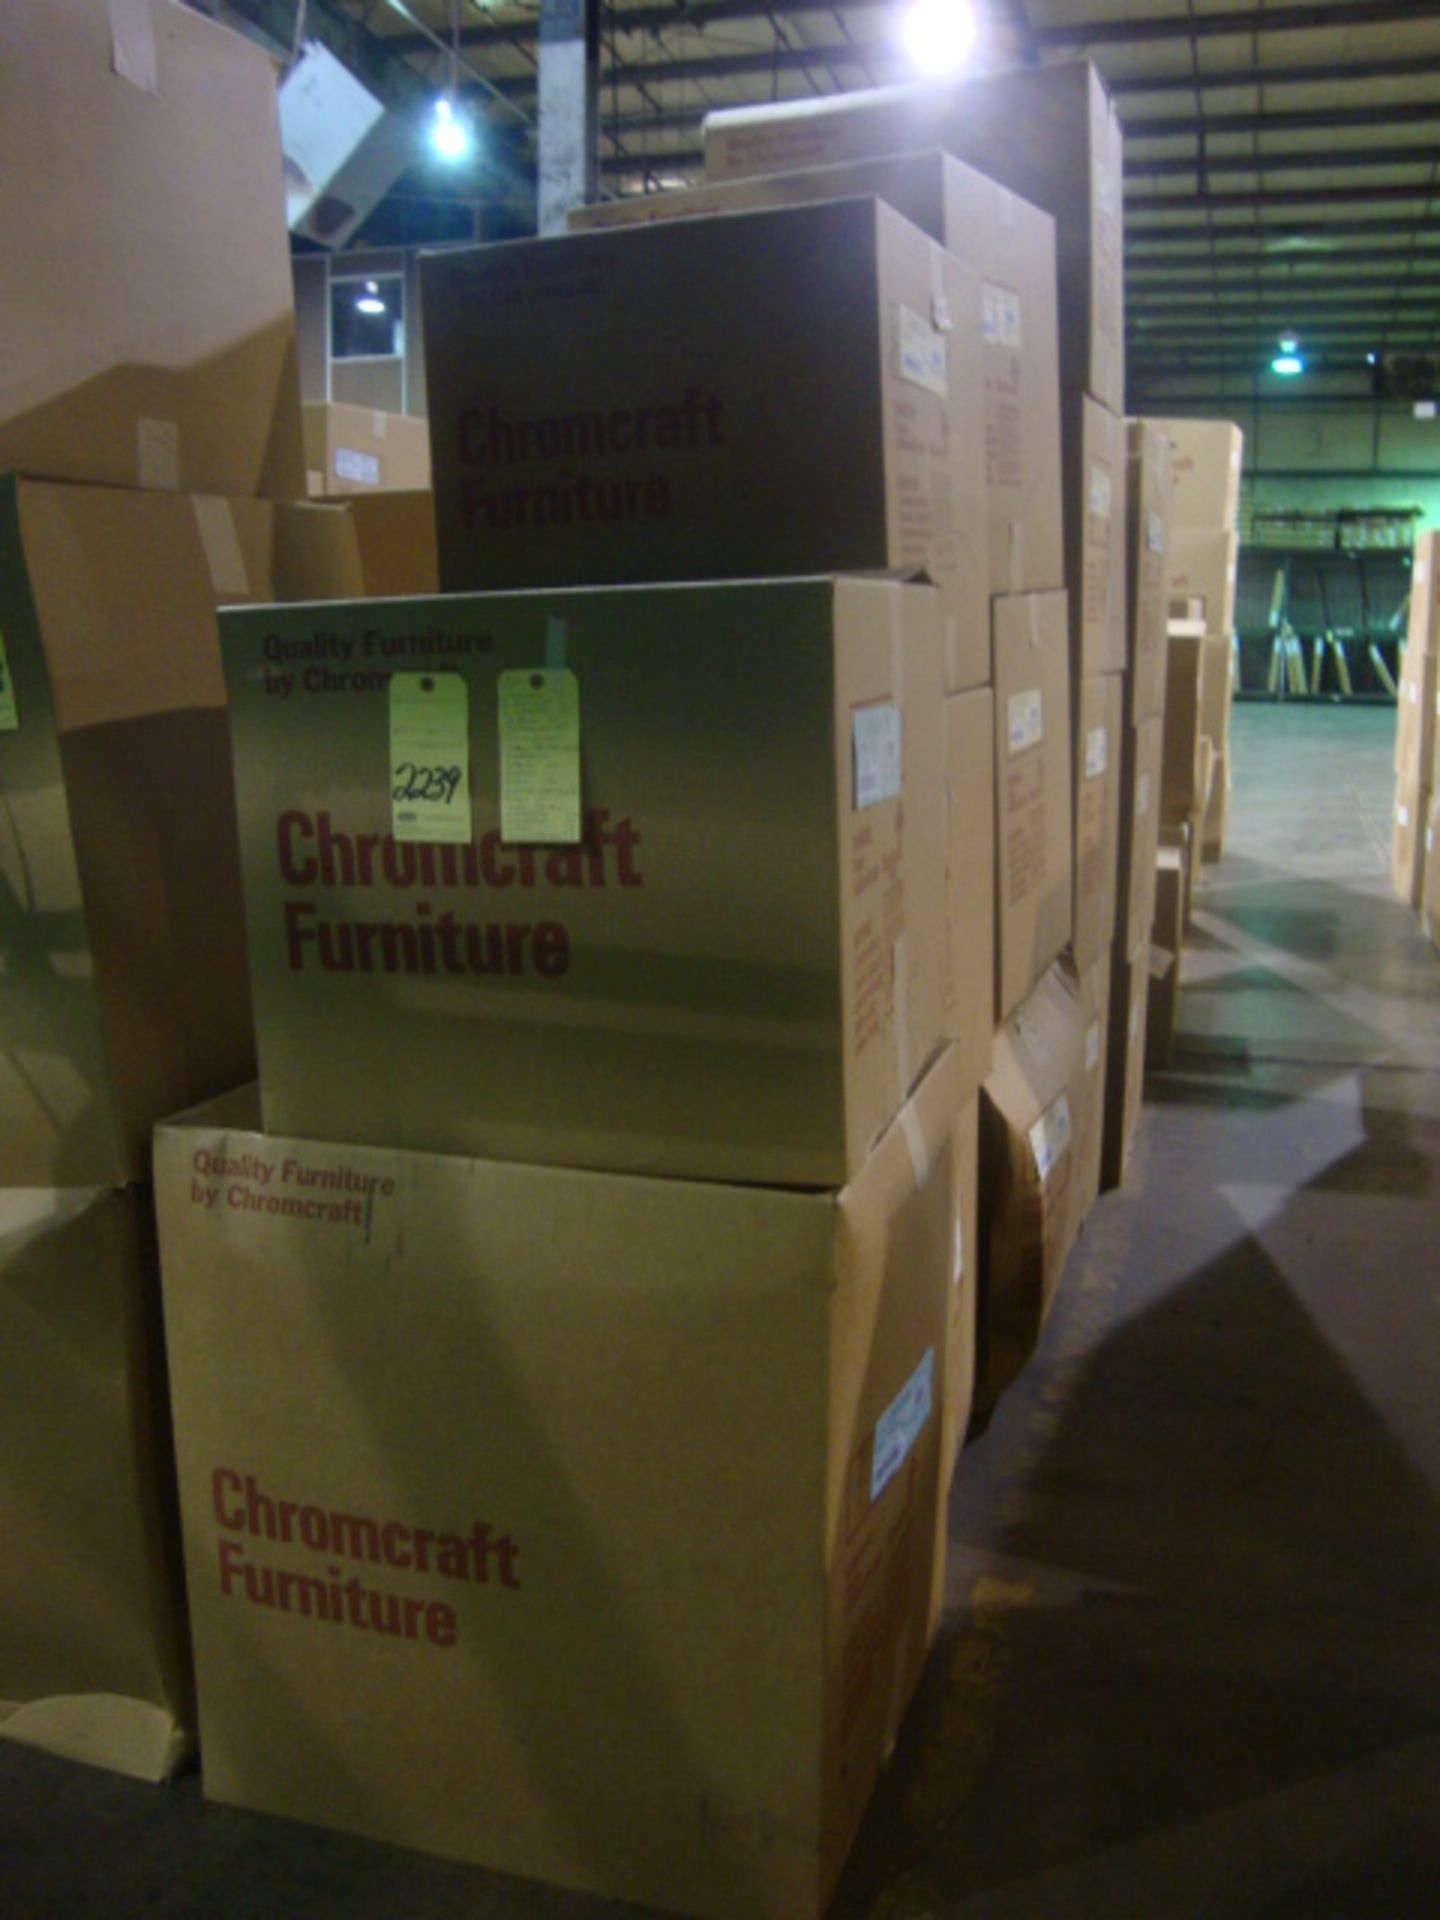 LOT CONSISTING OF: CHAIRS & BASES, (Item No.'s C95855JN, C128936AR, C188855ZN, M189UX, C277856AW,